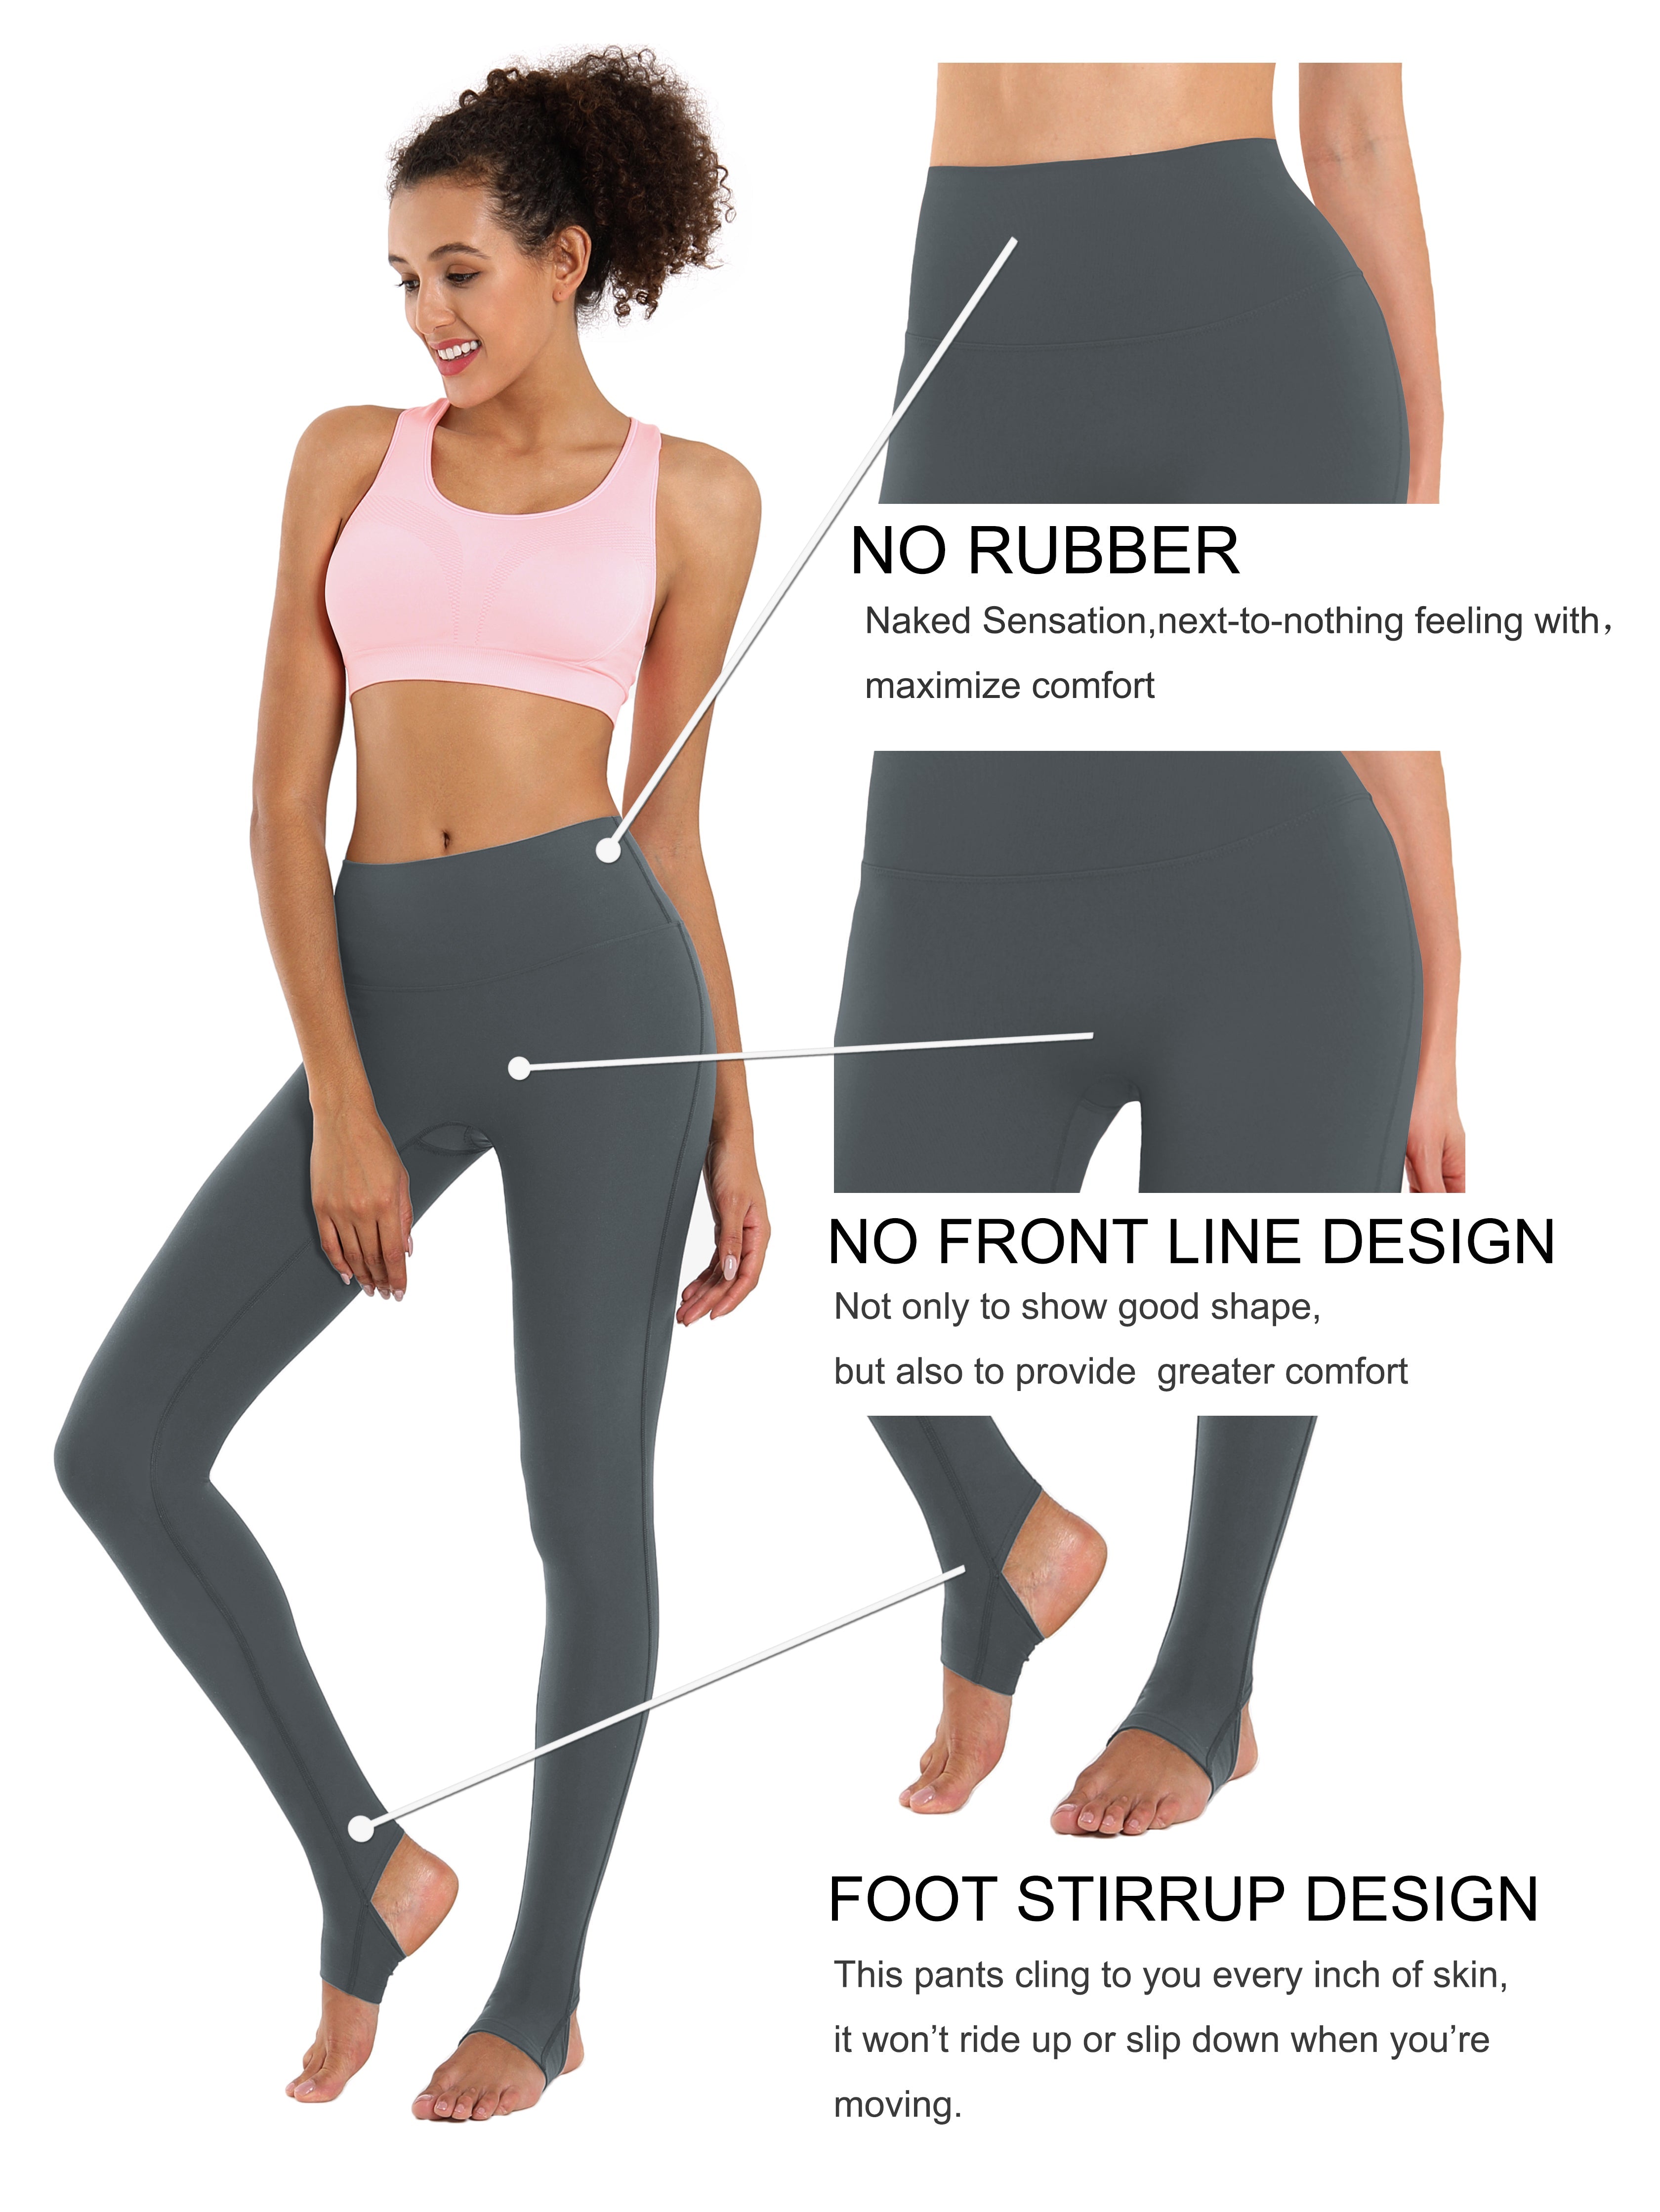 Over the Heel Pilates Pants shadowcharcoal Over the Heel Design 87%Nylon/13%Spandex Fabric doesn't attract lint easily 4-way stretch No see-through Moisture-wicking Tummy control